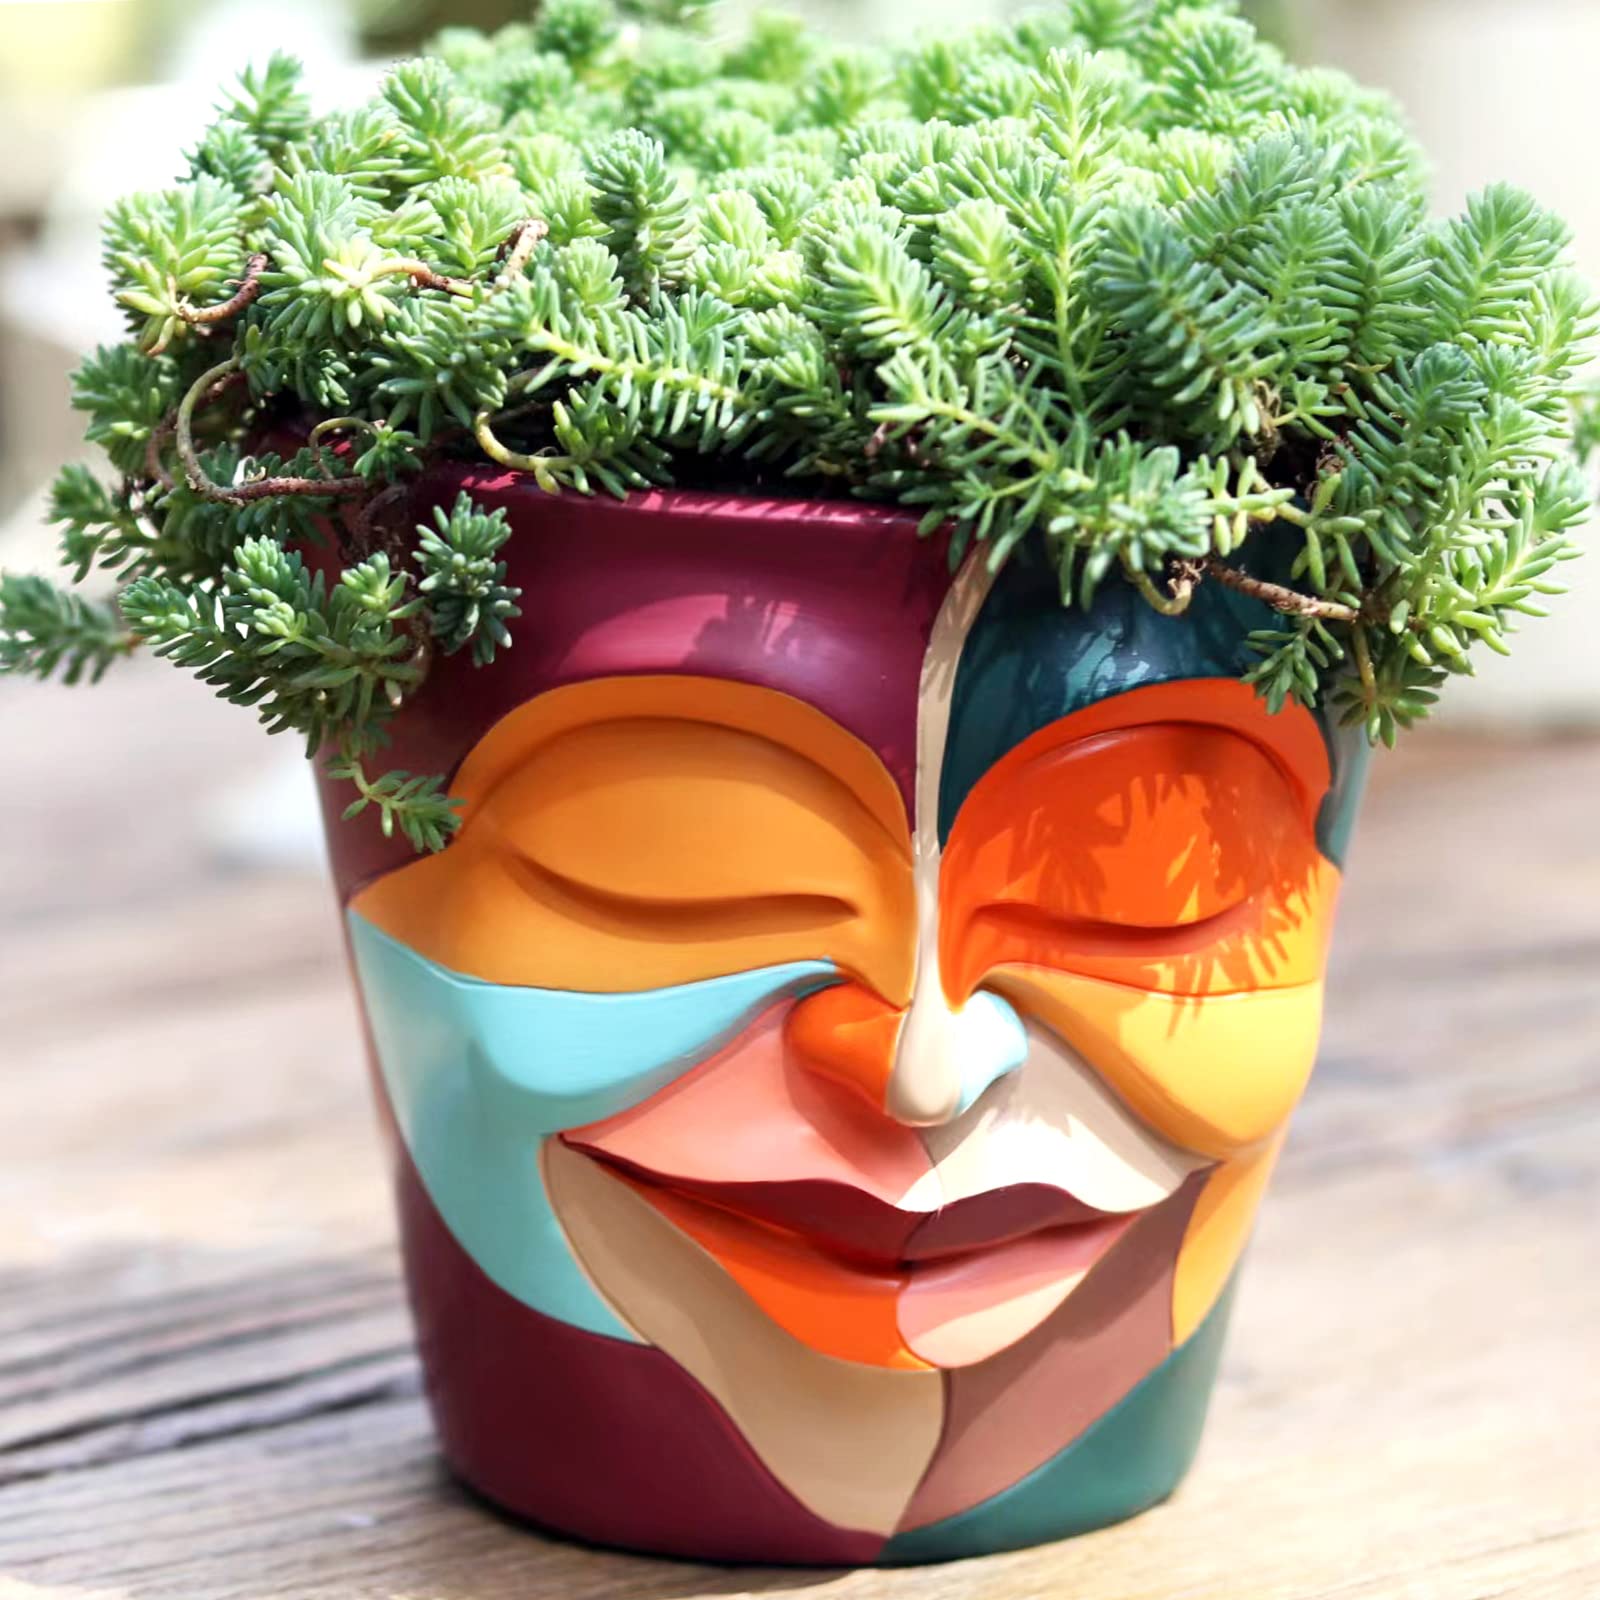 GUGUGO Abstract Rainbow Head Planter, Unique Face Plant Pot with Drainage, Cute Eclectic Flower Planters Pots for Indoor & Outdoor Plants, Colorful Funny Room Decor - Plantonio